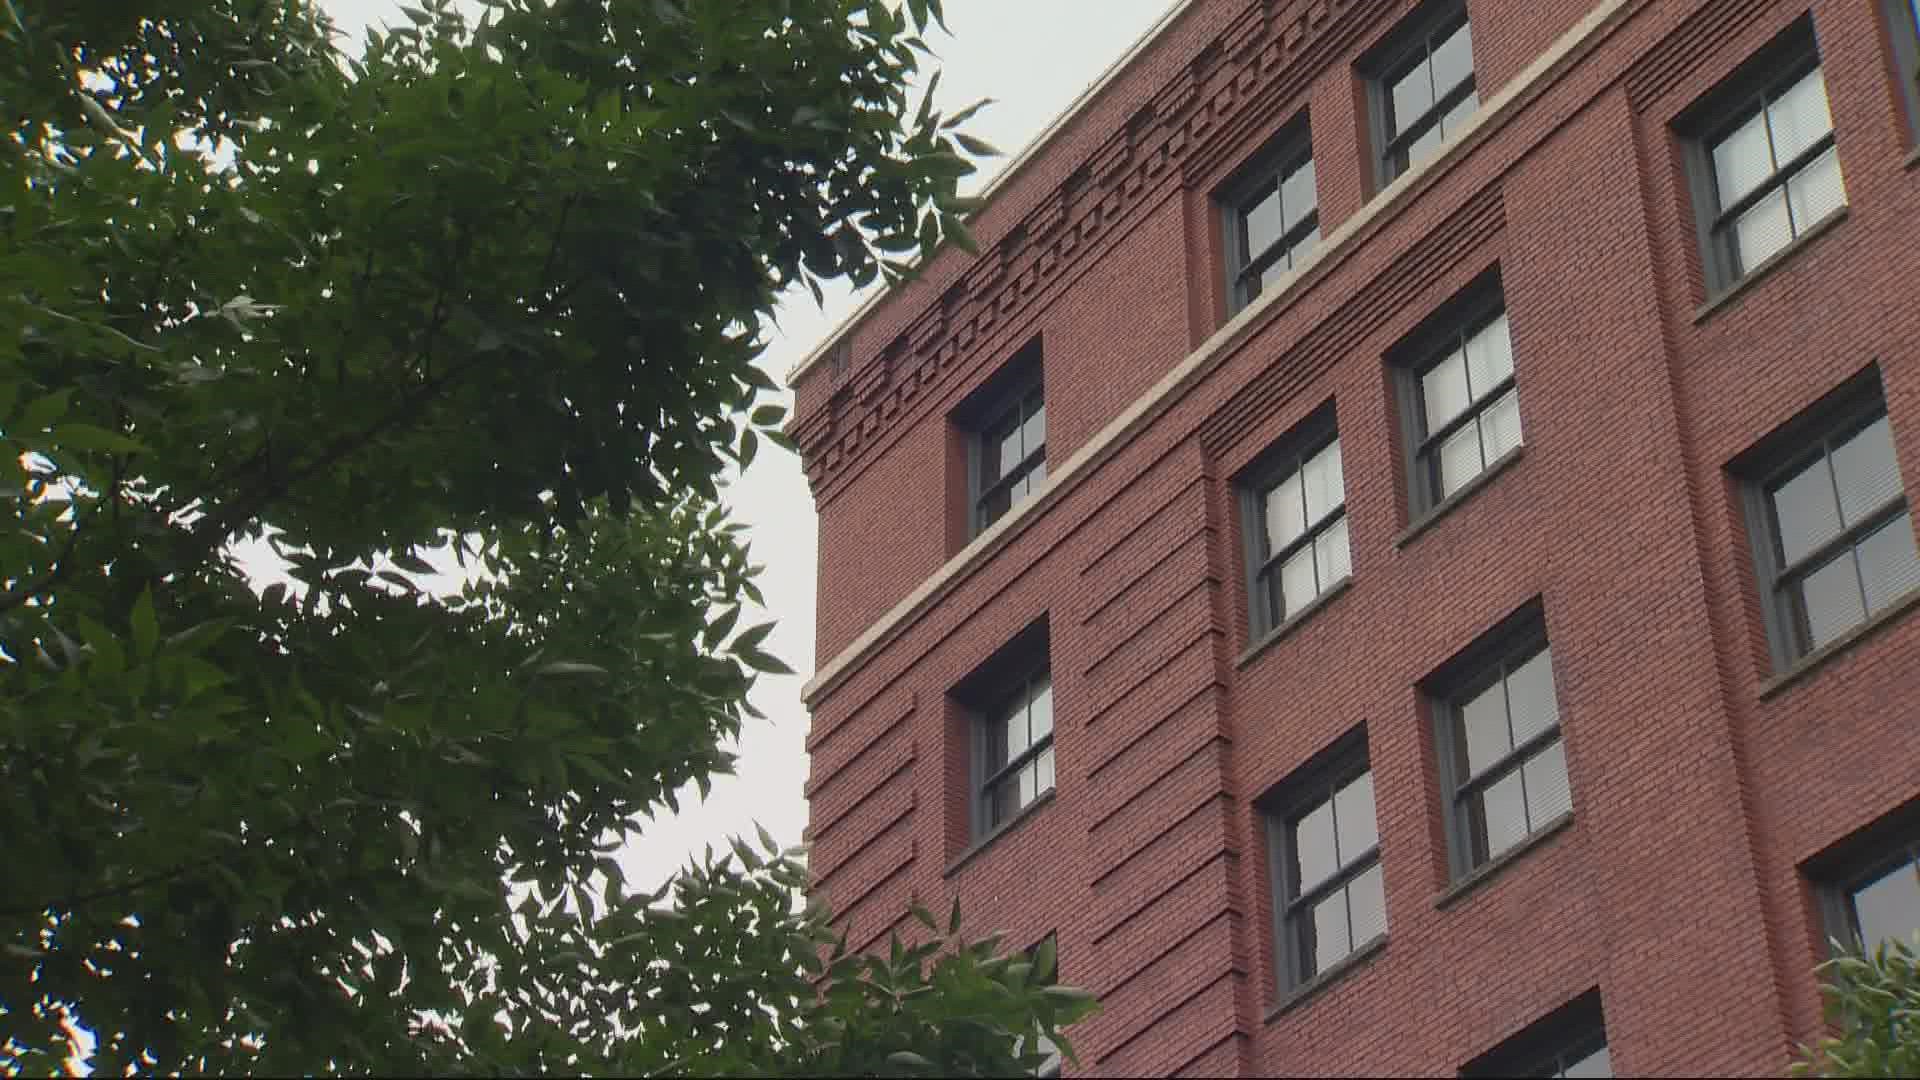 Office buildings in downtown Portland are going on the market at an alarming rate, and safety concerns are partly to blame. KGW's Blair Best explains.